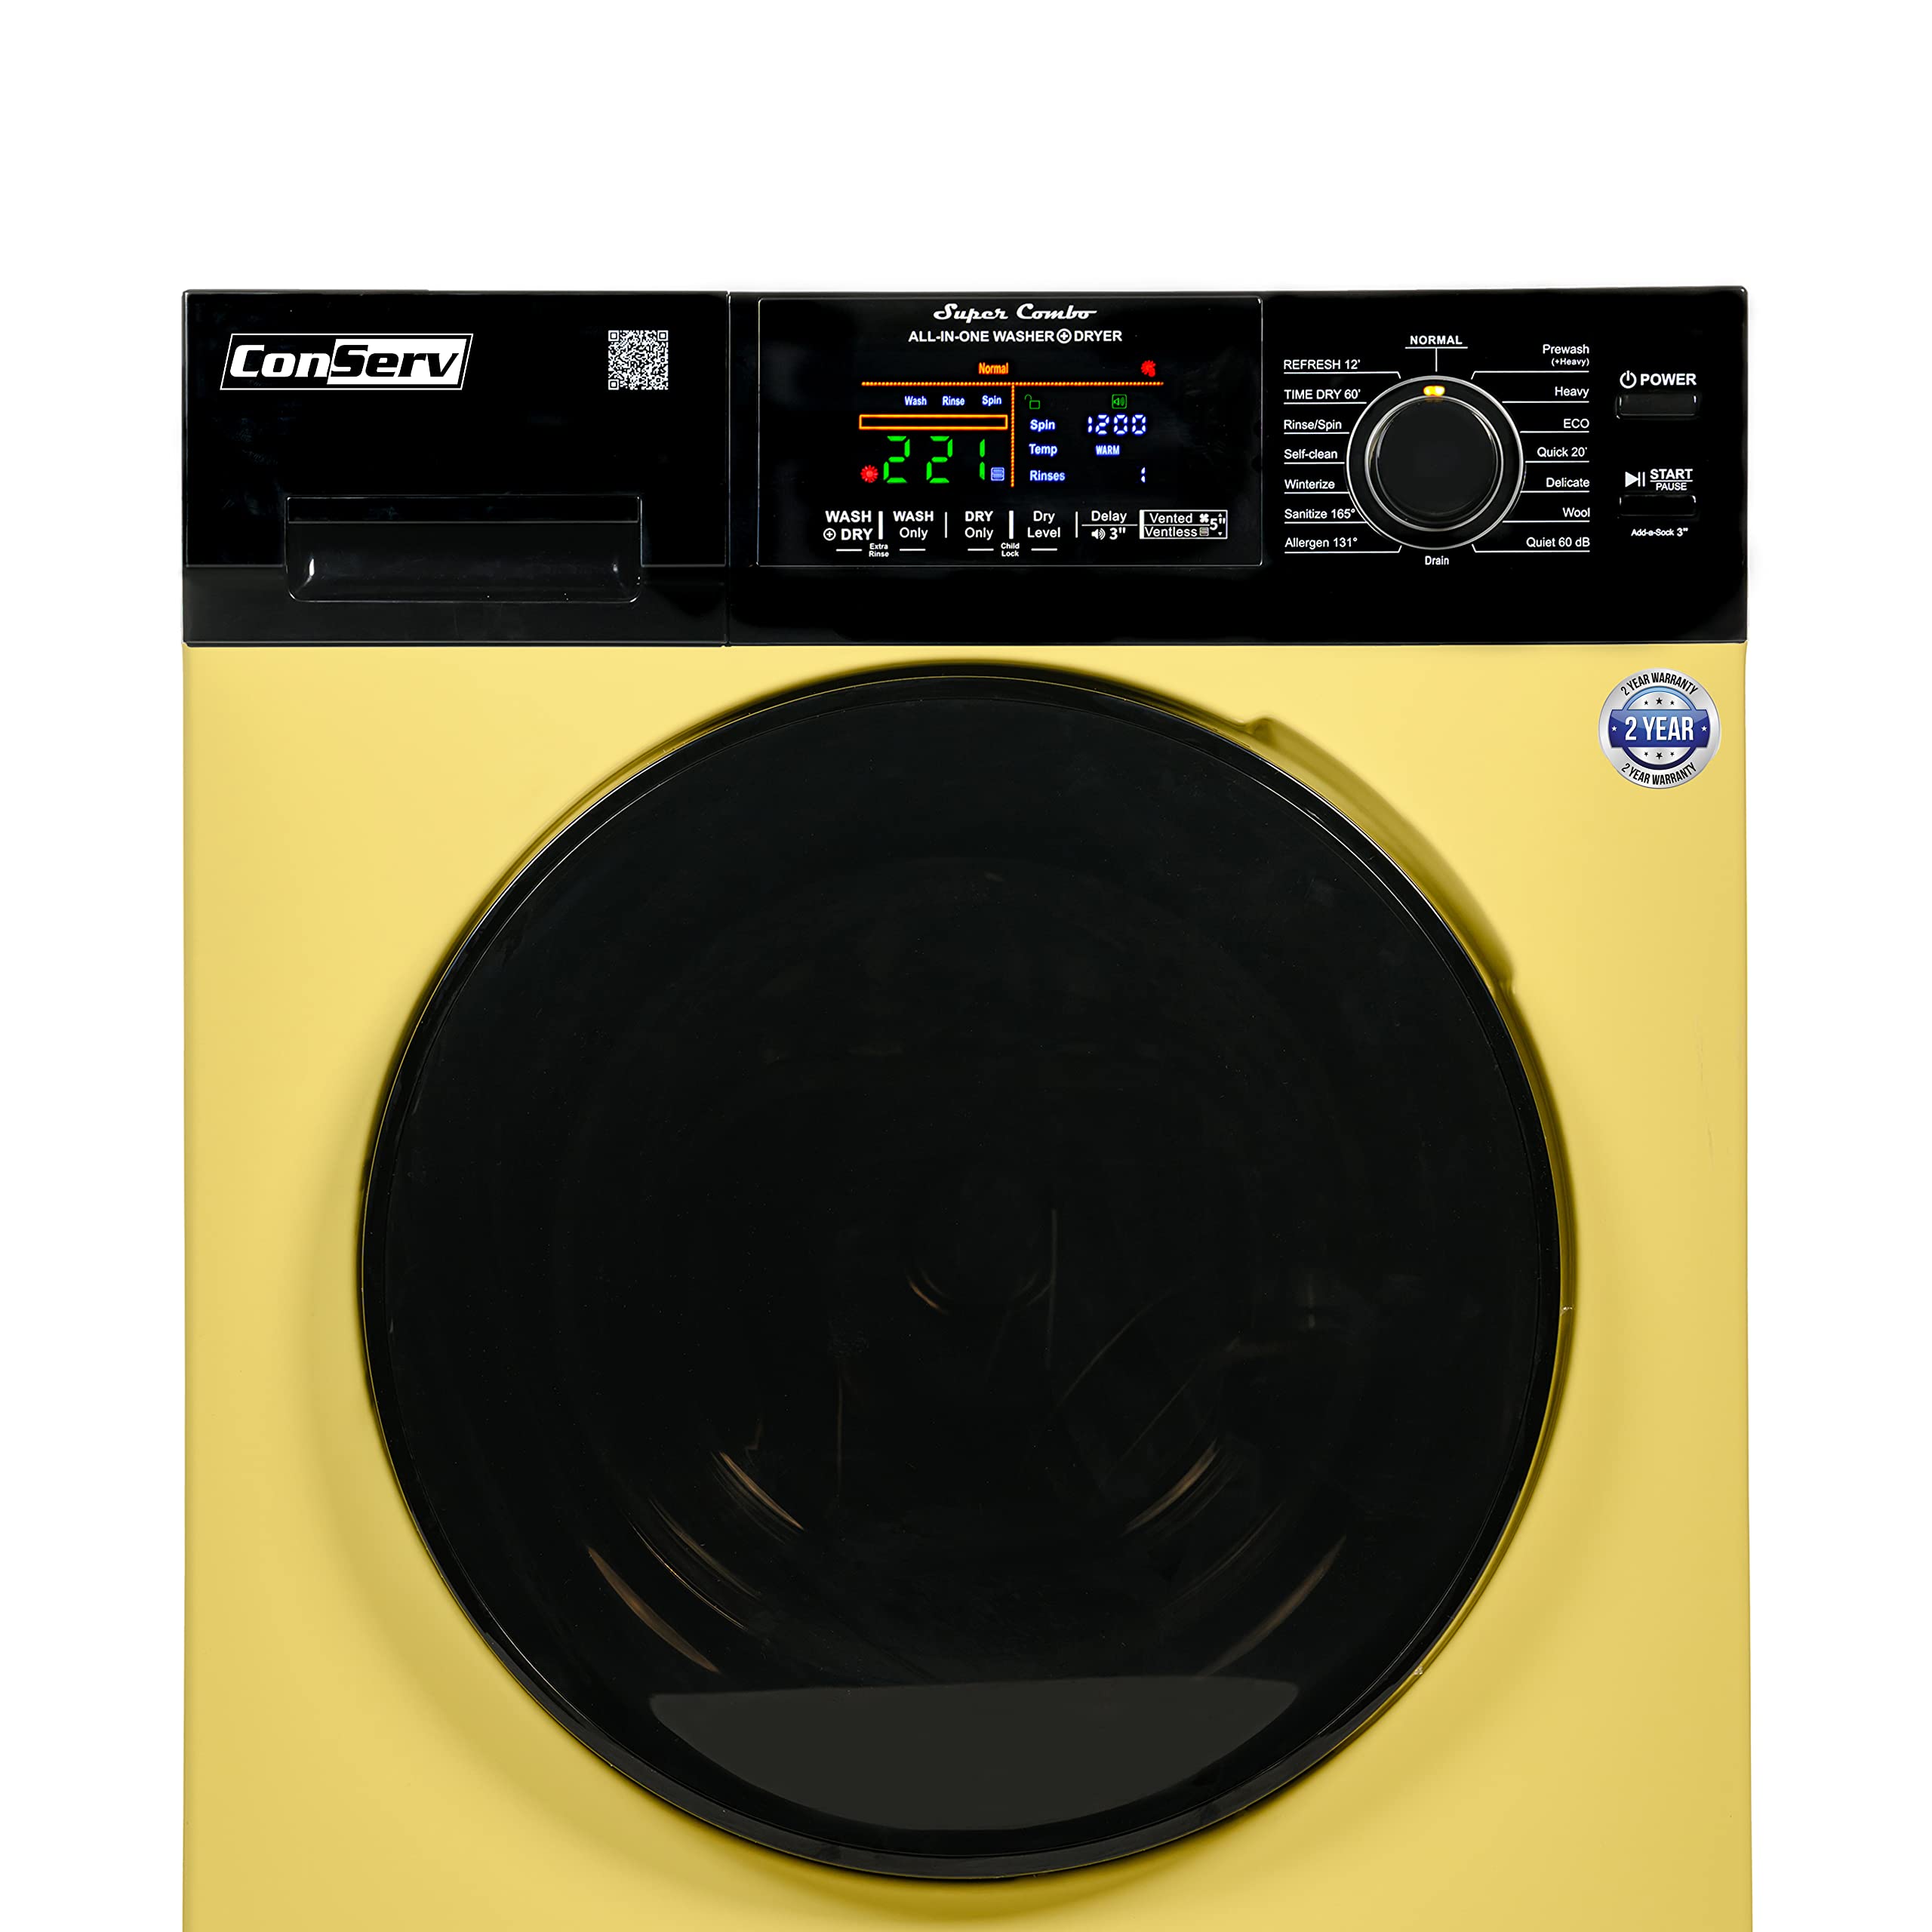 Conserv Digital Compact 110V Vented/Ventless 18 lbs Combo Washer Dryer 1400 RPM (Yellow Black)